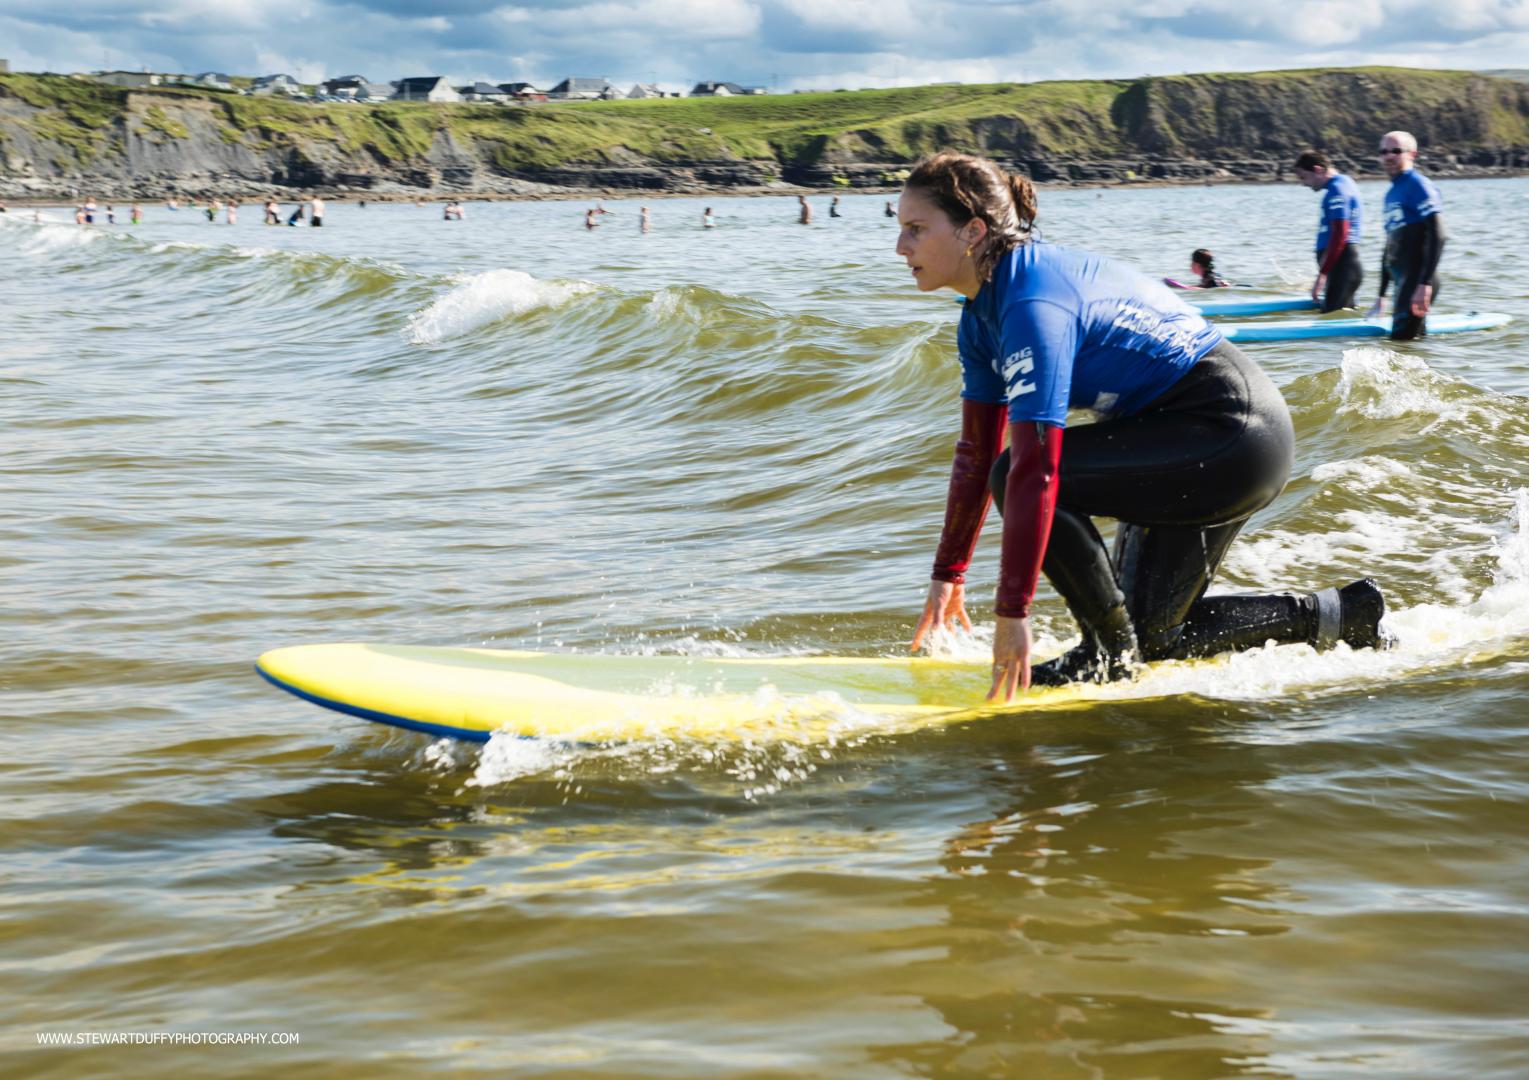 Girl surfing a wave in Ireland